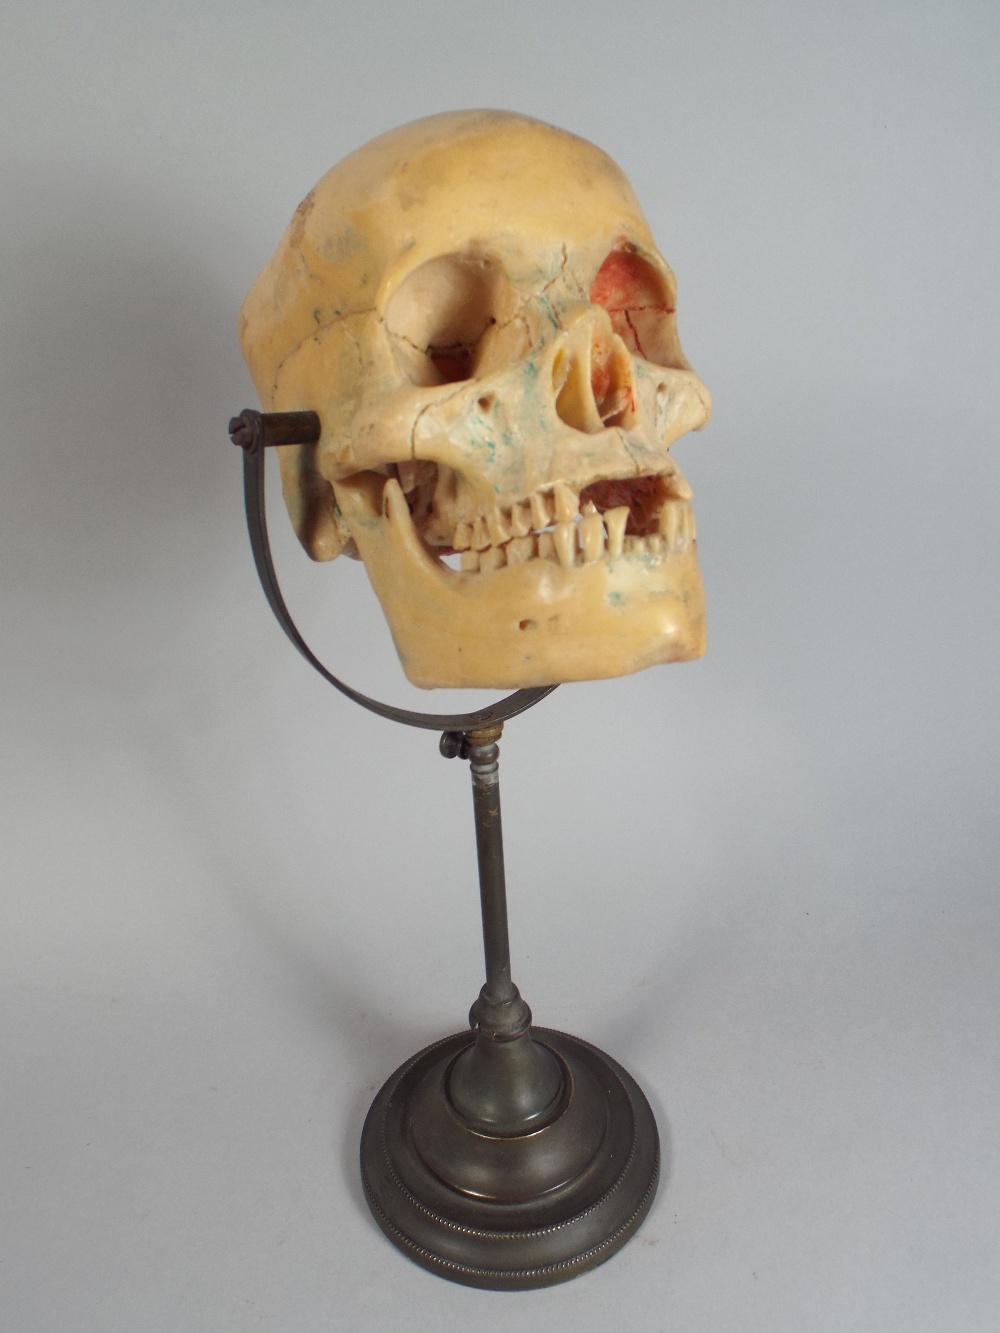 An Early 20th Century Doctors Model of a Life Size Human Skull Supported on a Metal Stand.